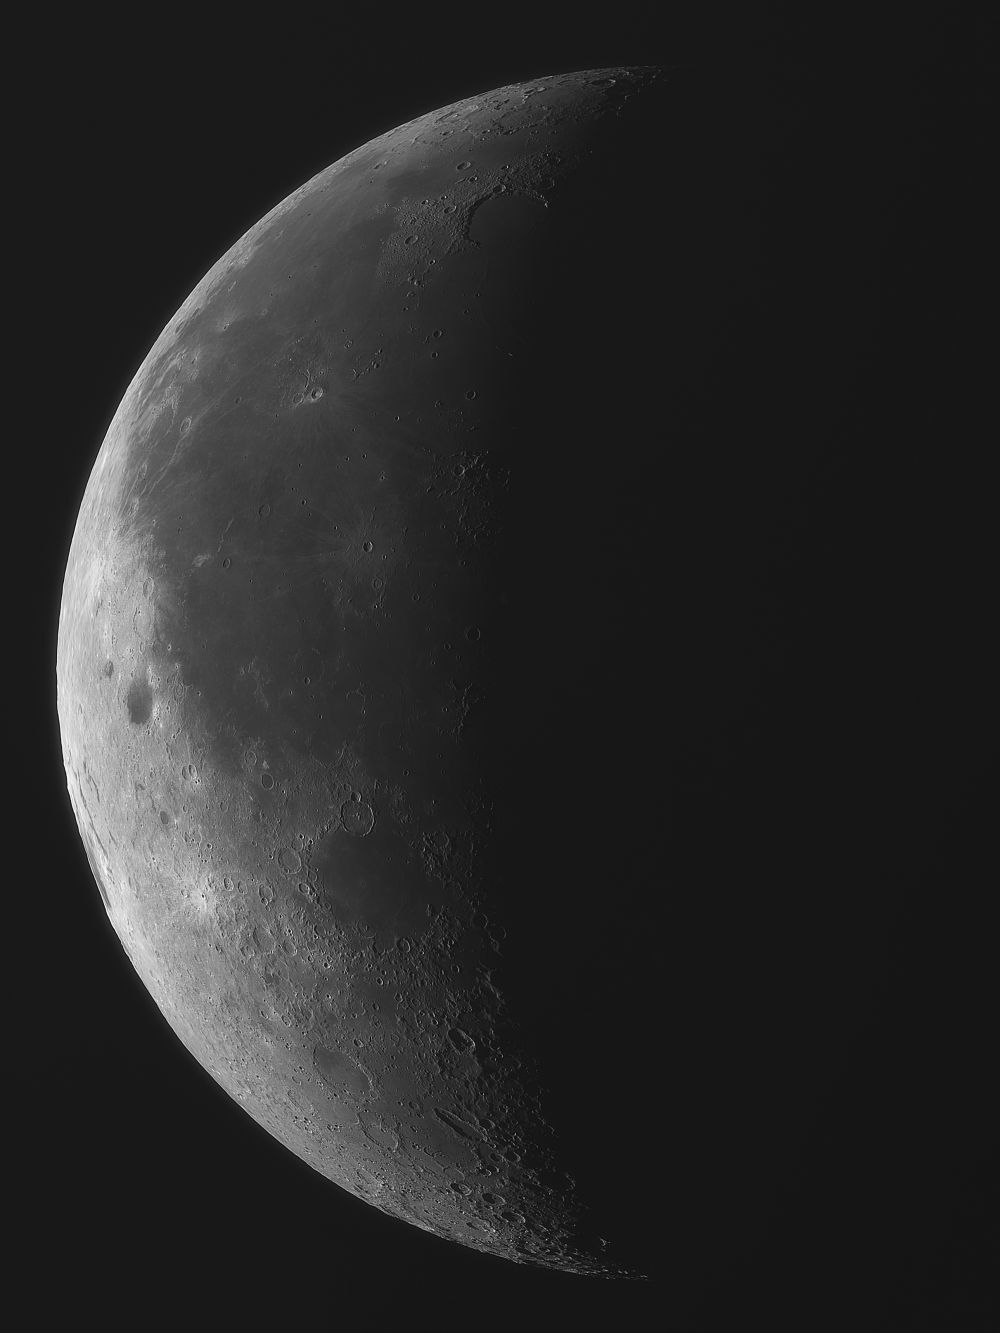 The Moon 2020-10-11 - daytime capture